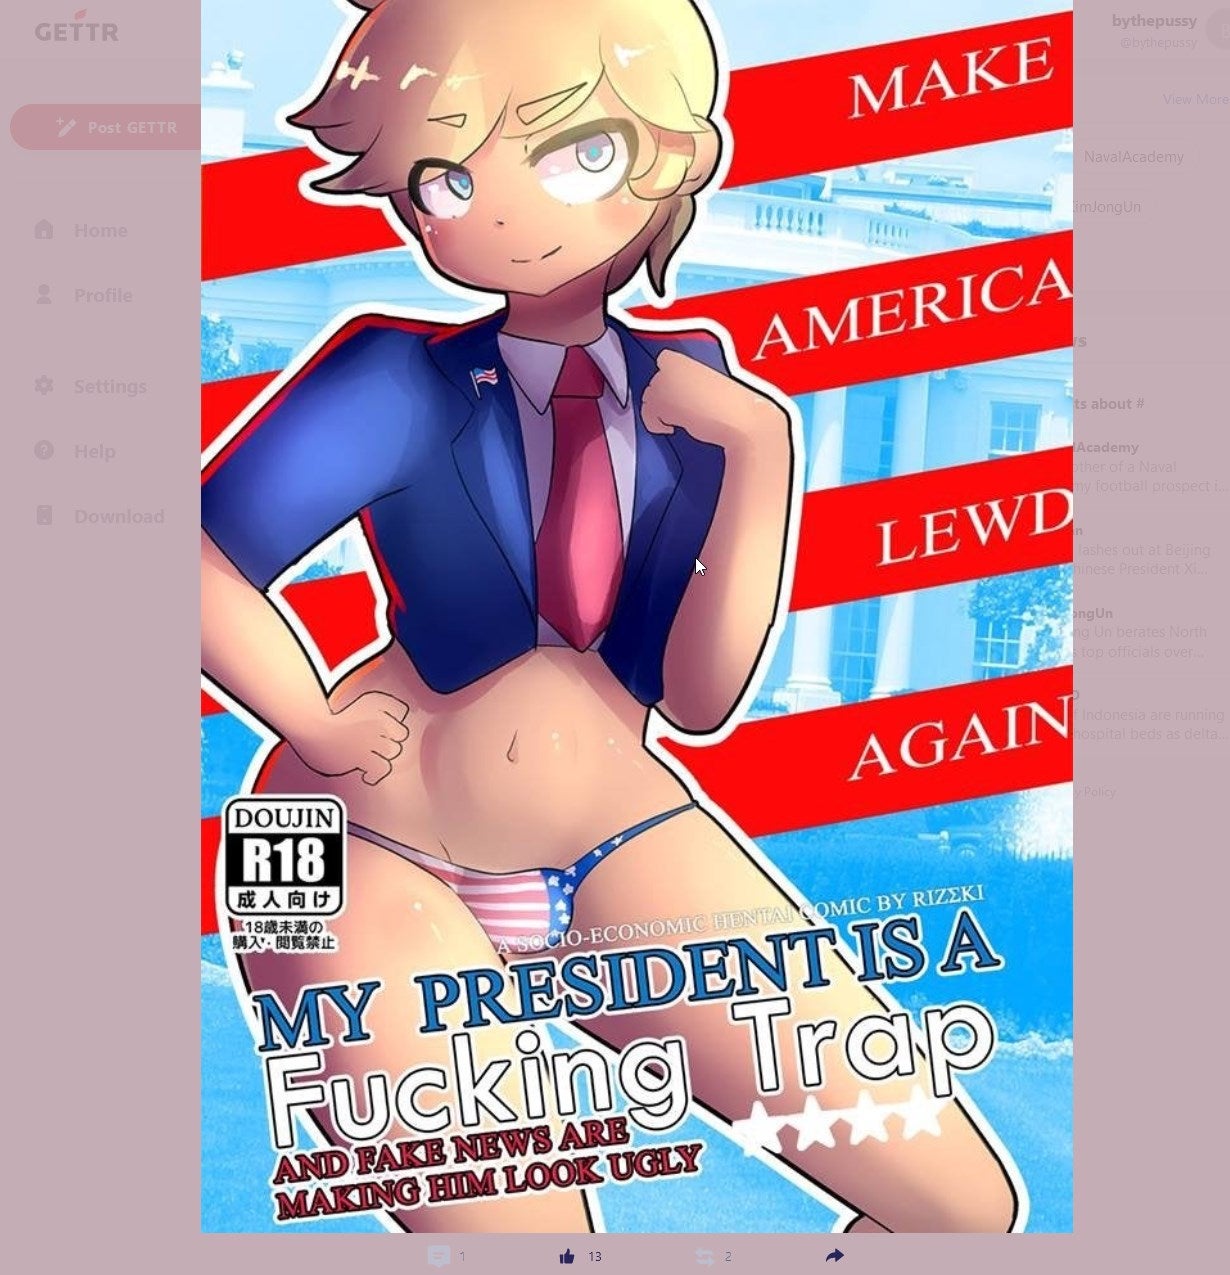 New Social Media Site From Team Trump Upsets Qanon Faithful With Hentai and Men In Diapers